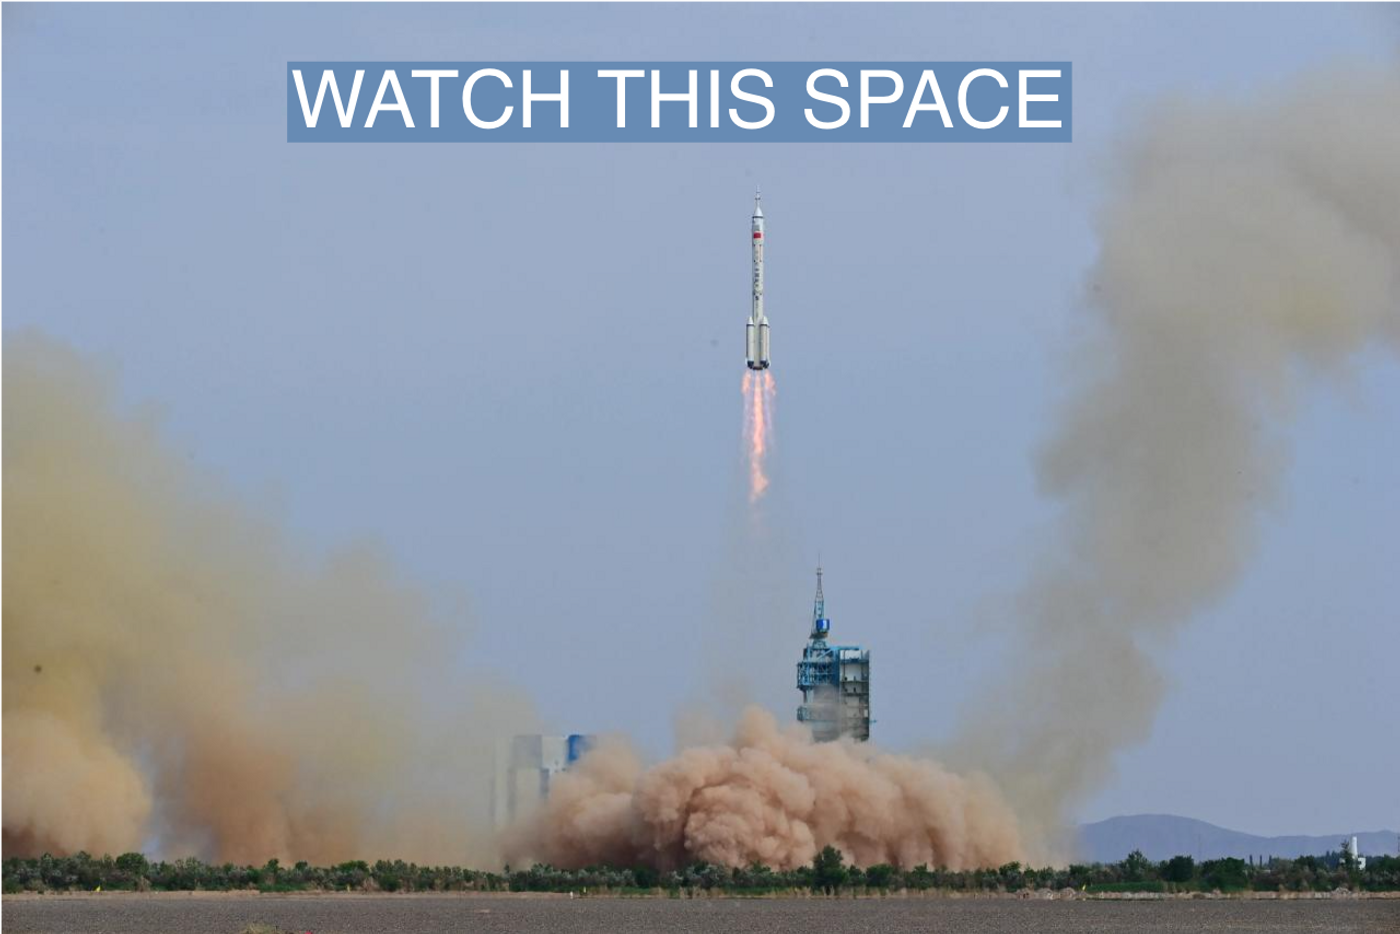 A rocket, carrying the Shenzhou-16 spacecraft and three astronauts, takes off from the launching area of Jiuquan Satellite Launch Center for a crewed mission to China's Tiangong space station.